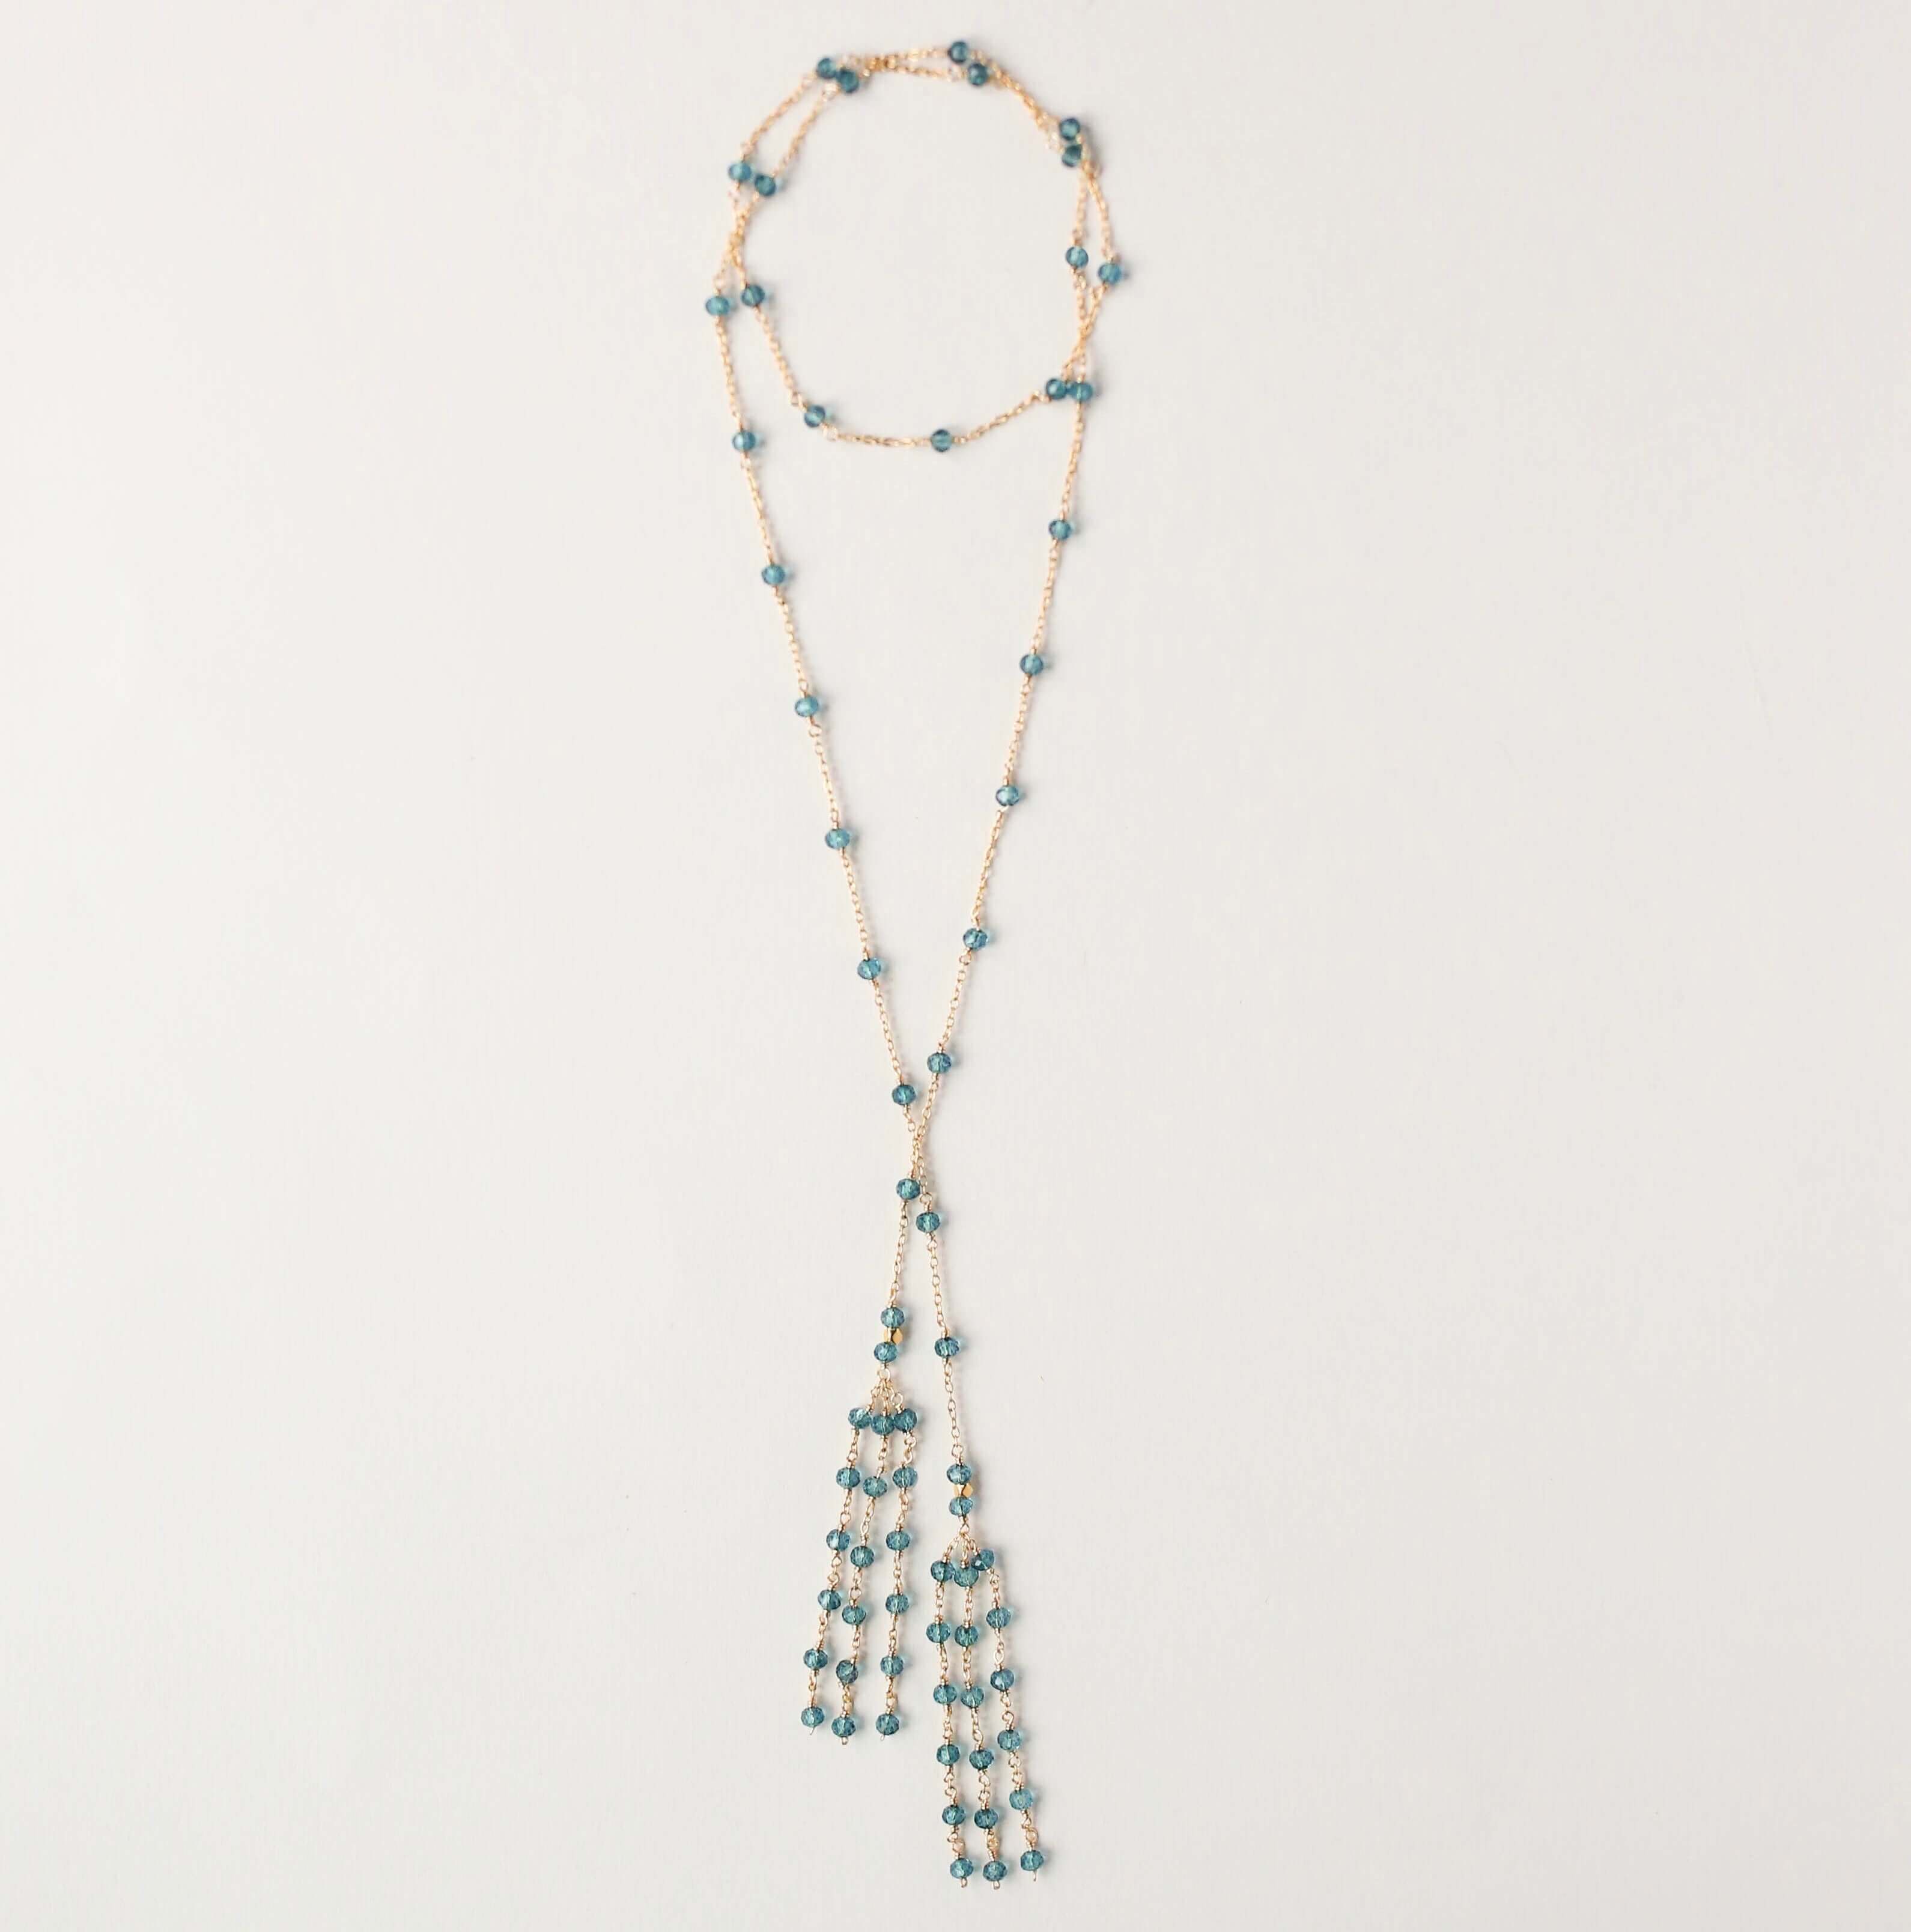 Gold-plated London Blue Quartz Lariat Necklace with a stunning tassel